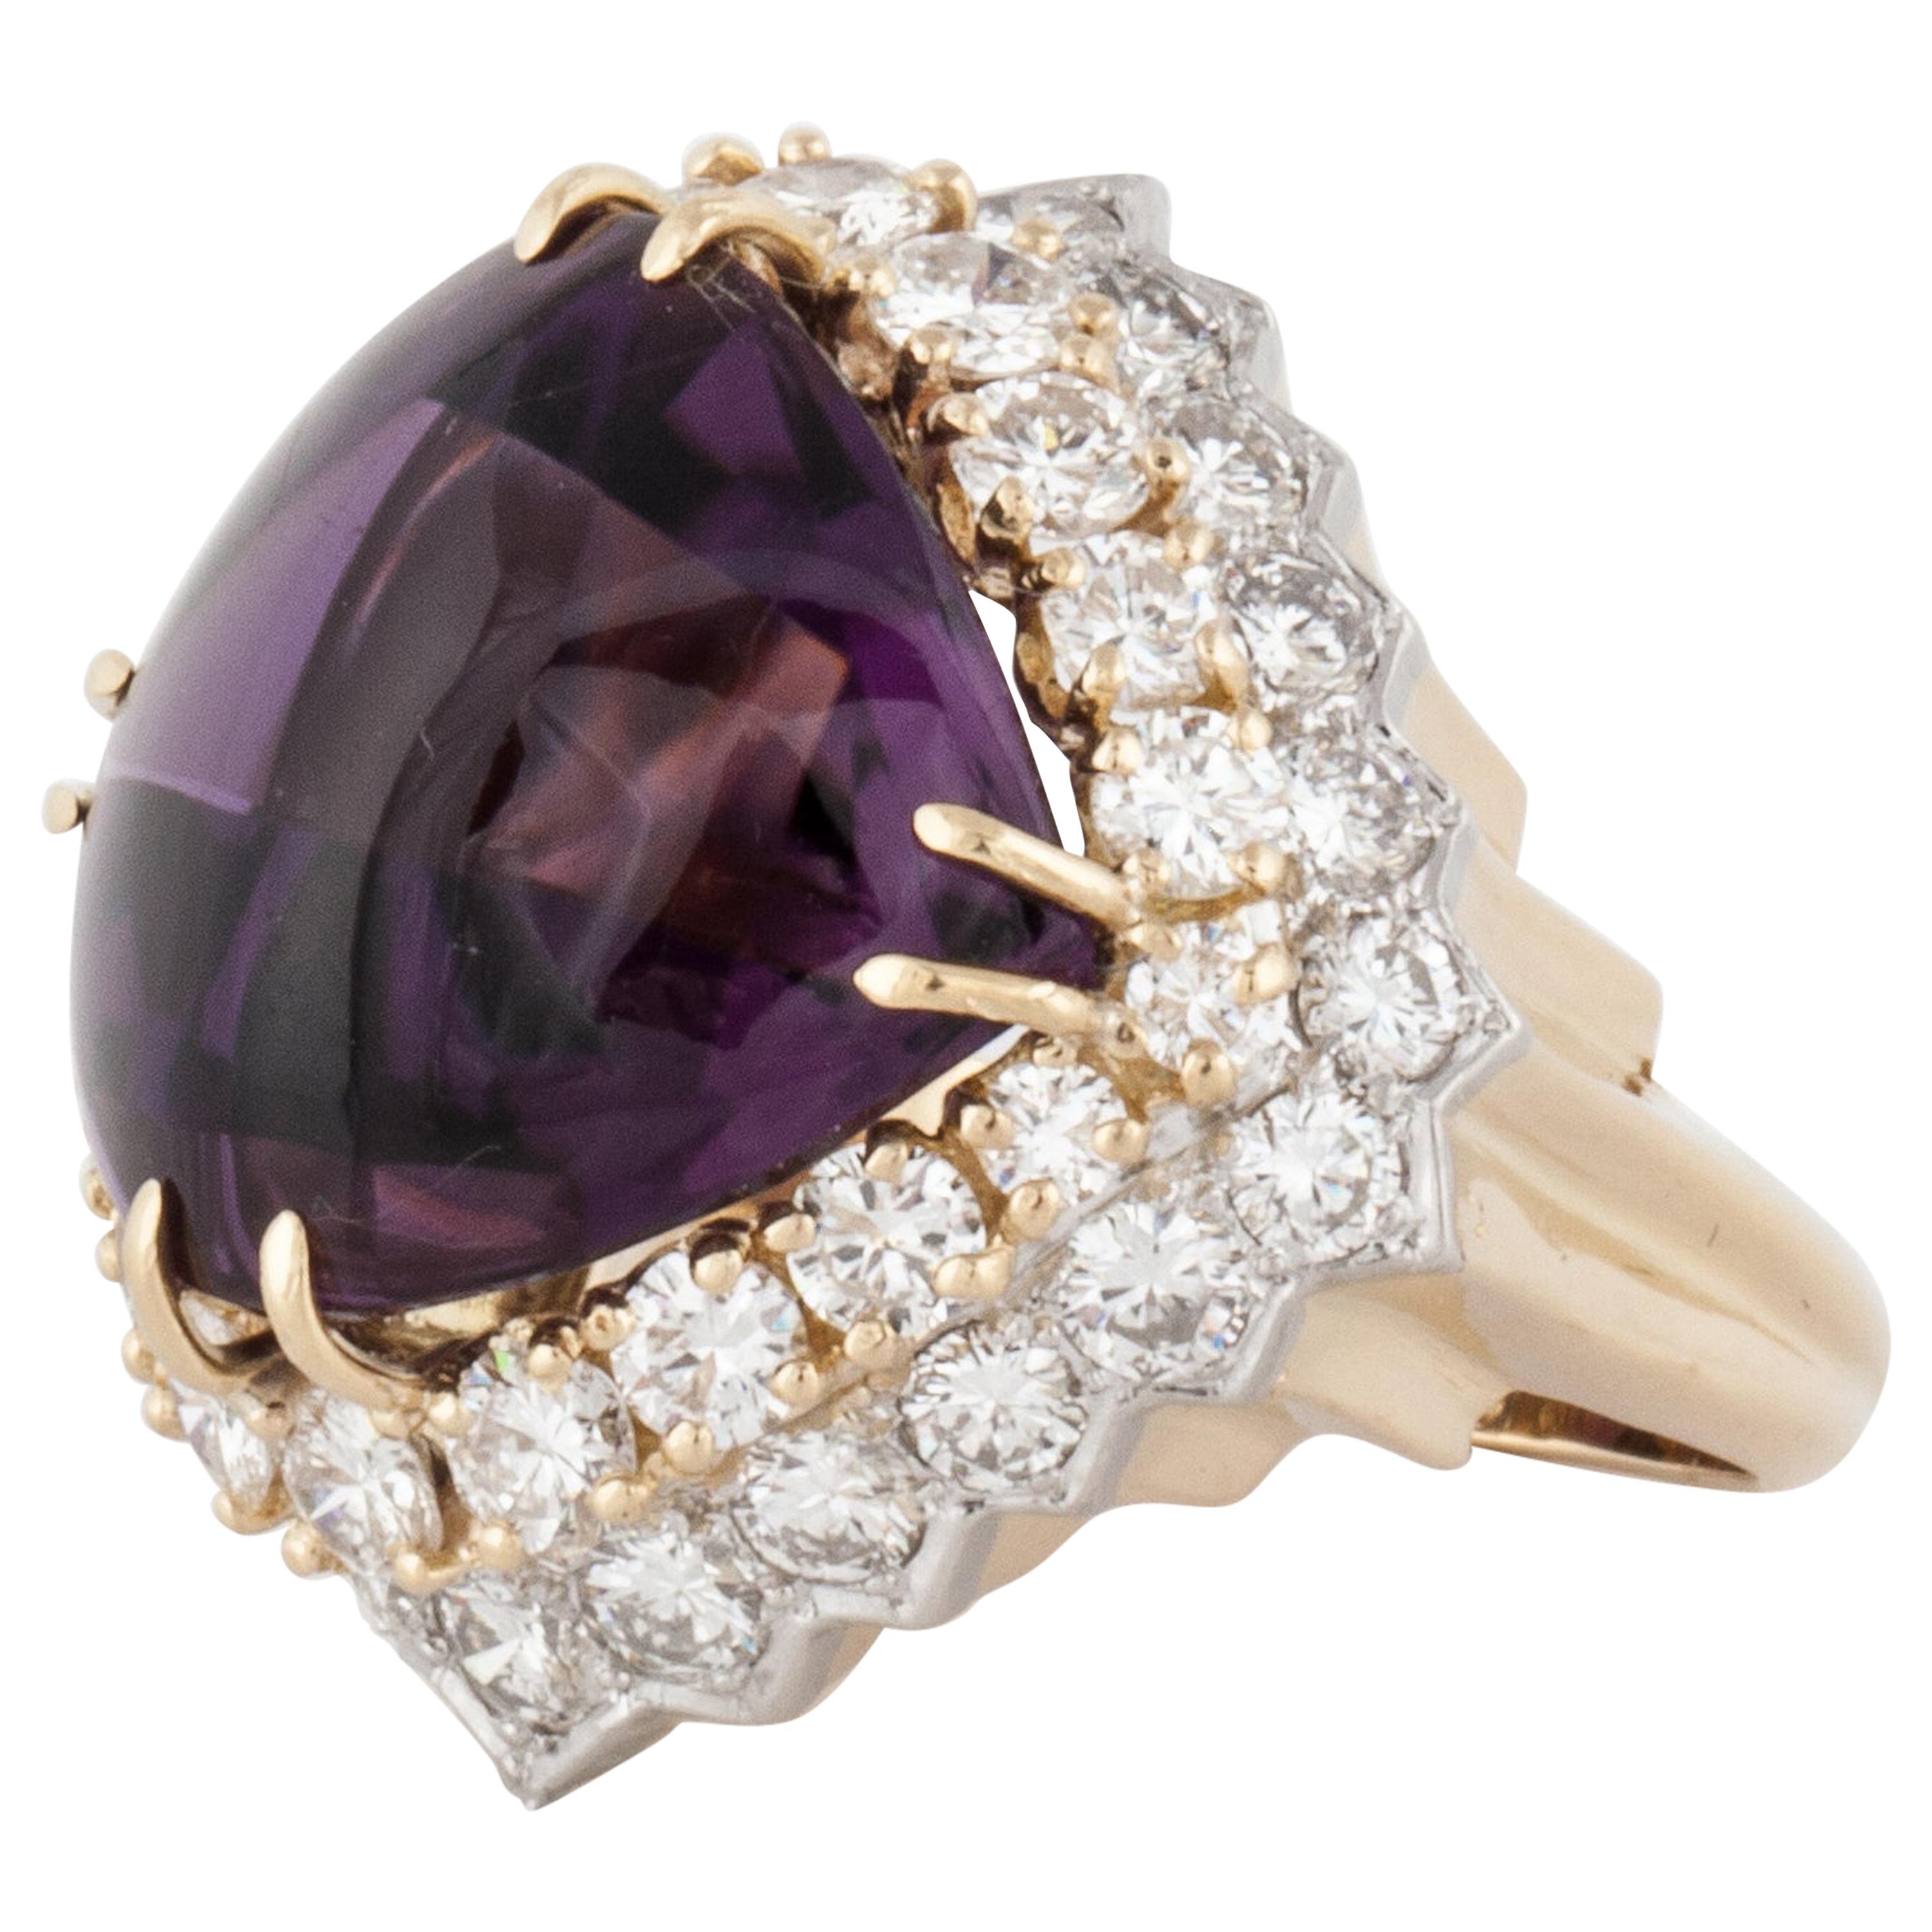 Cabochon Amethyst and Diamond Ring in 18K Gold